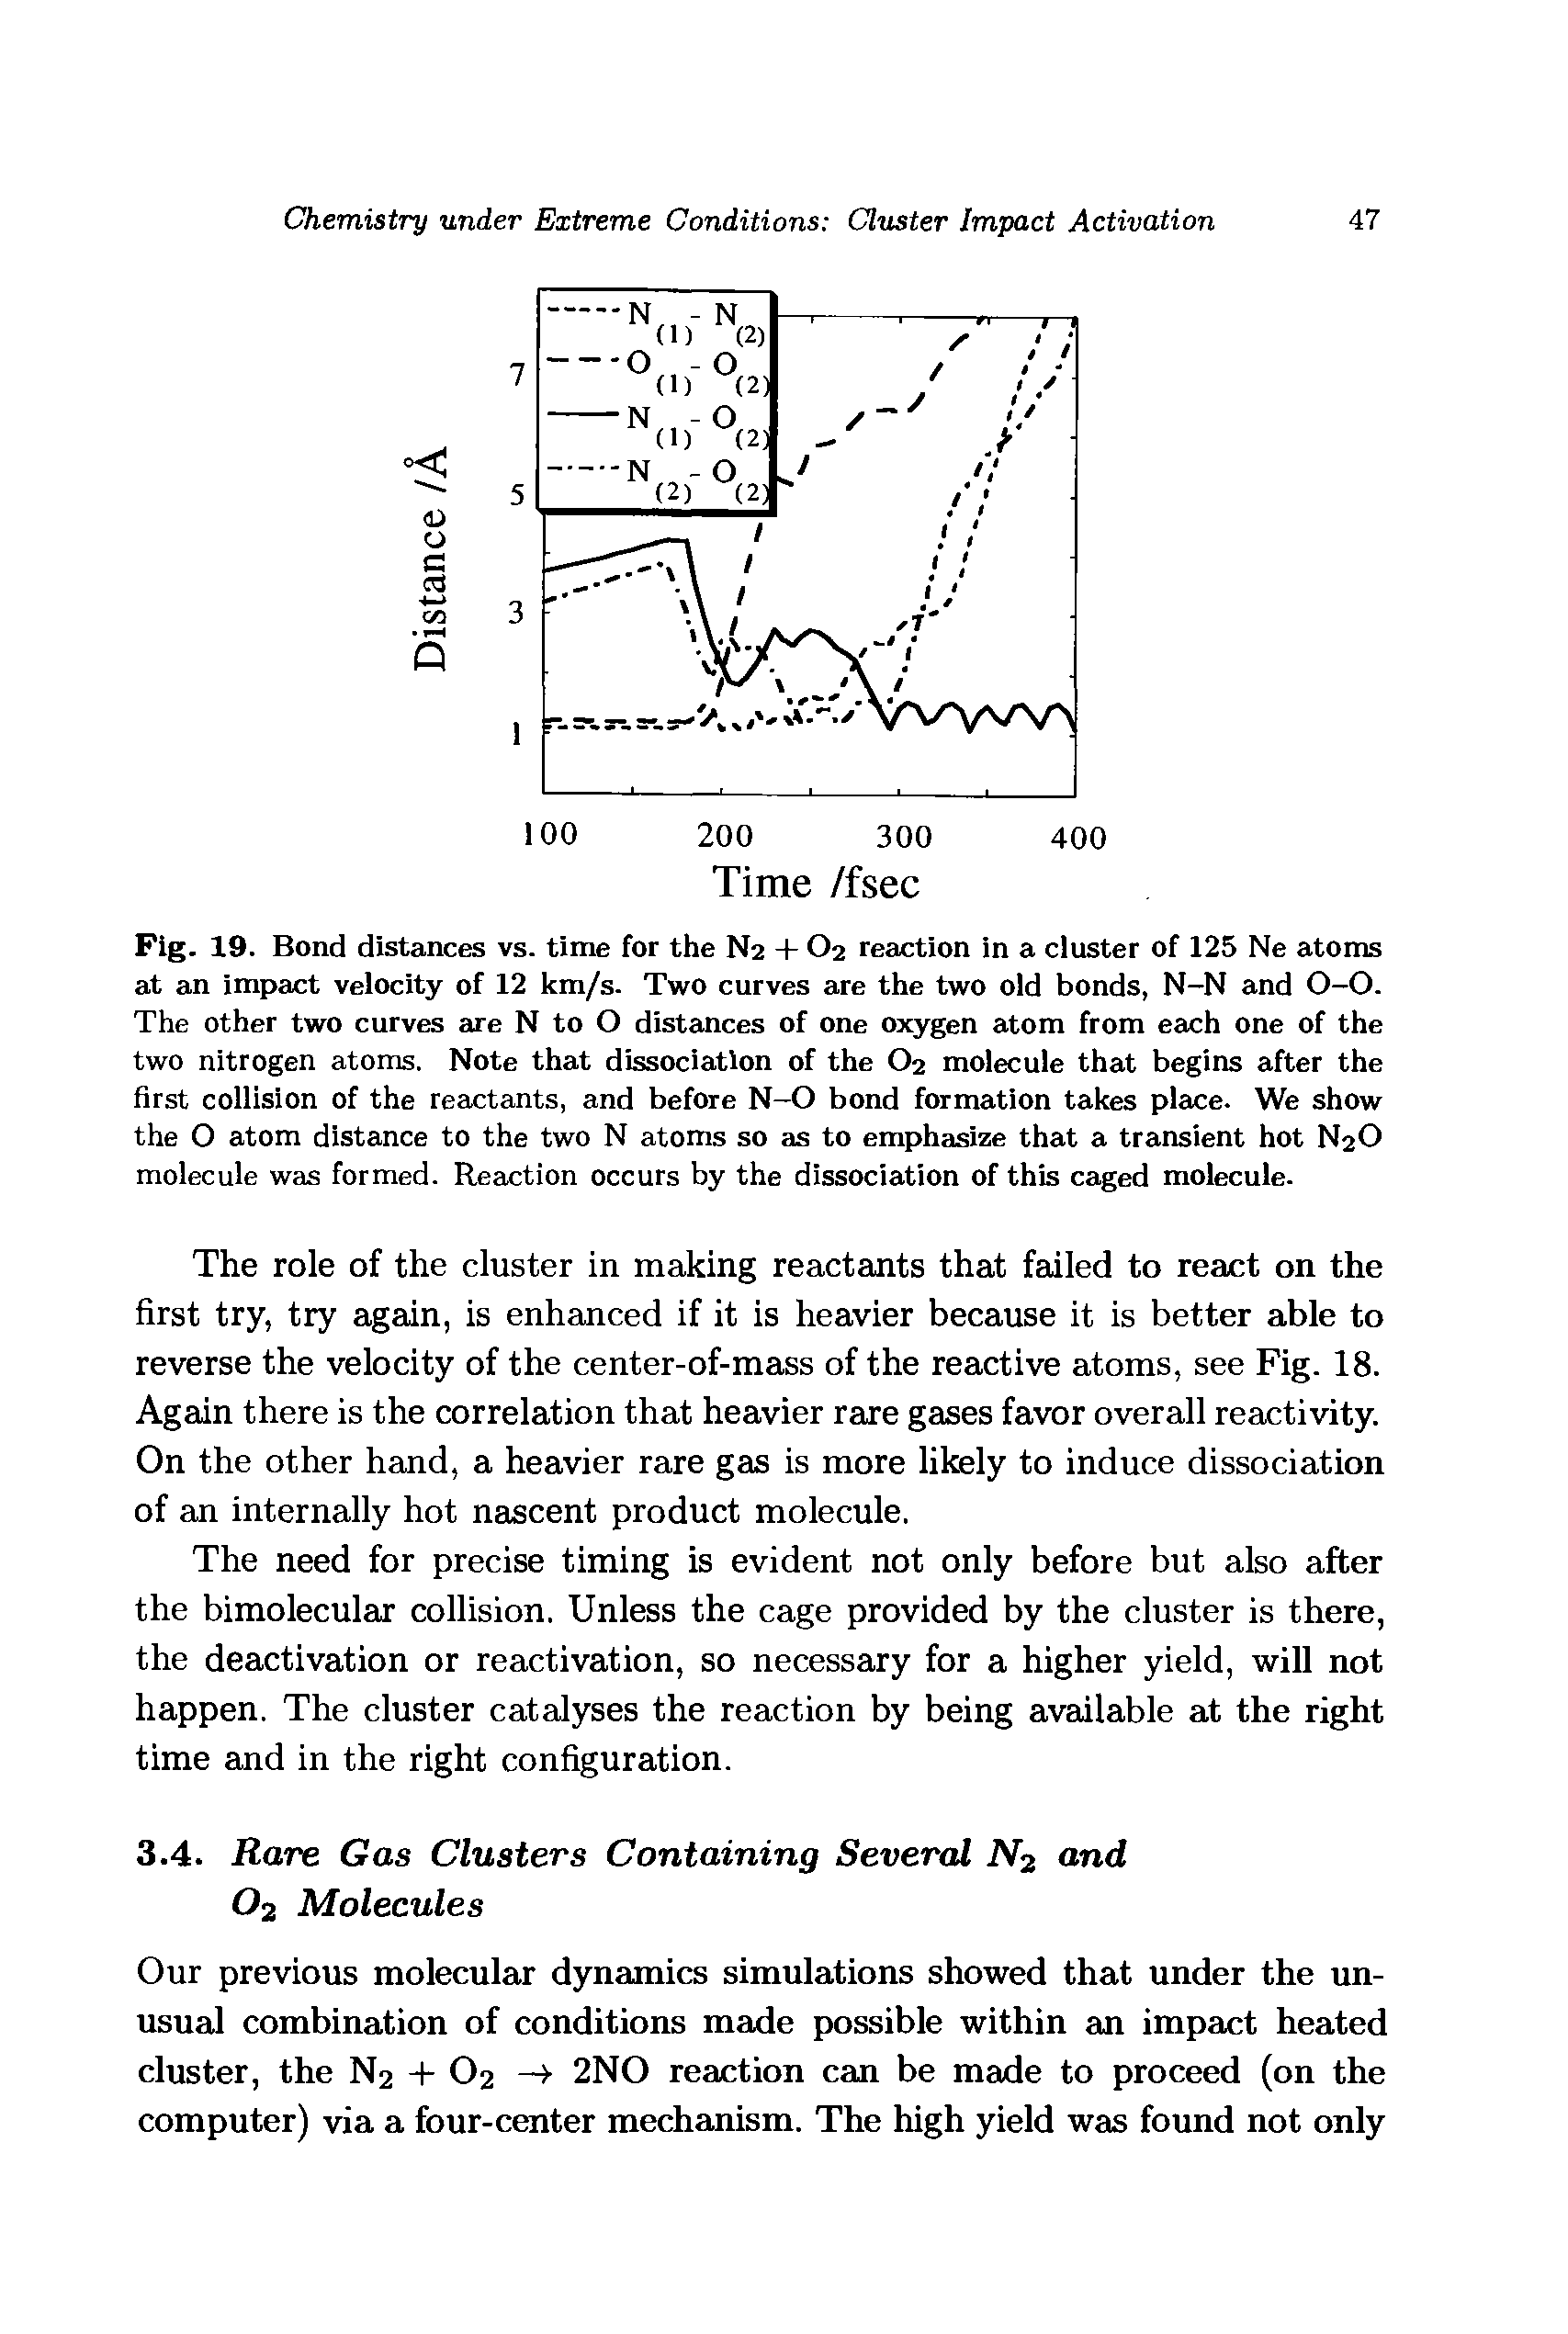 Fig. 19. Bond distances vs. time for the N2 + O2 reaction in a cluster of 125 Ne atoms at an impact velocity of 12 km/s. Two curves are the two old bonds, N-N and 0-0. The other two curves are N to O distetnces of one oxygen atom from each one of the two nitrogen atoms. Note that dissociation of the O2 molecule that begins after the first collision of the reactants, and before N-O bond formation takes place. We show the O atom distance to the two N atoms so as to emphasize that a transient hot N2O molecule was formed. Reaction occurs by the dissociation of this caged molecule.